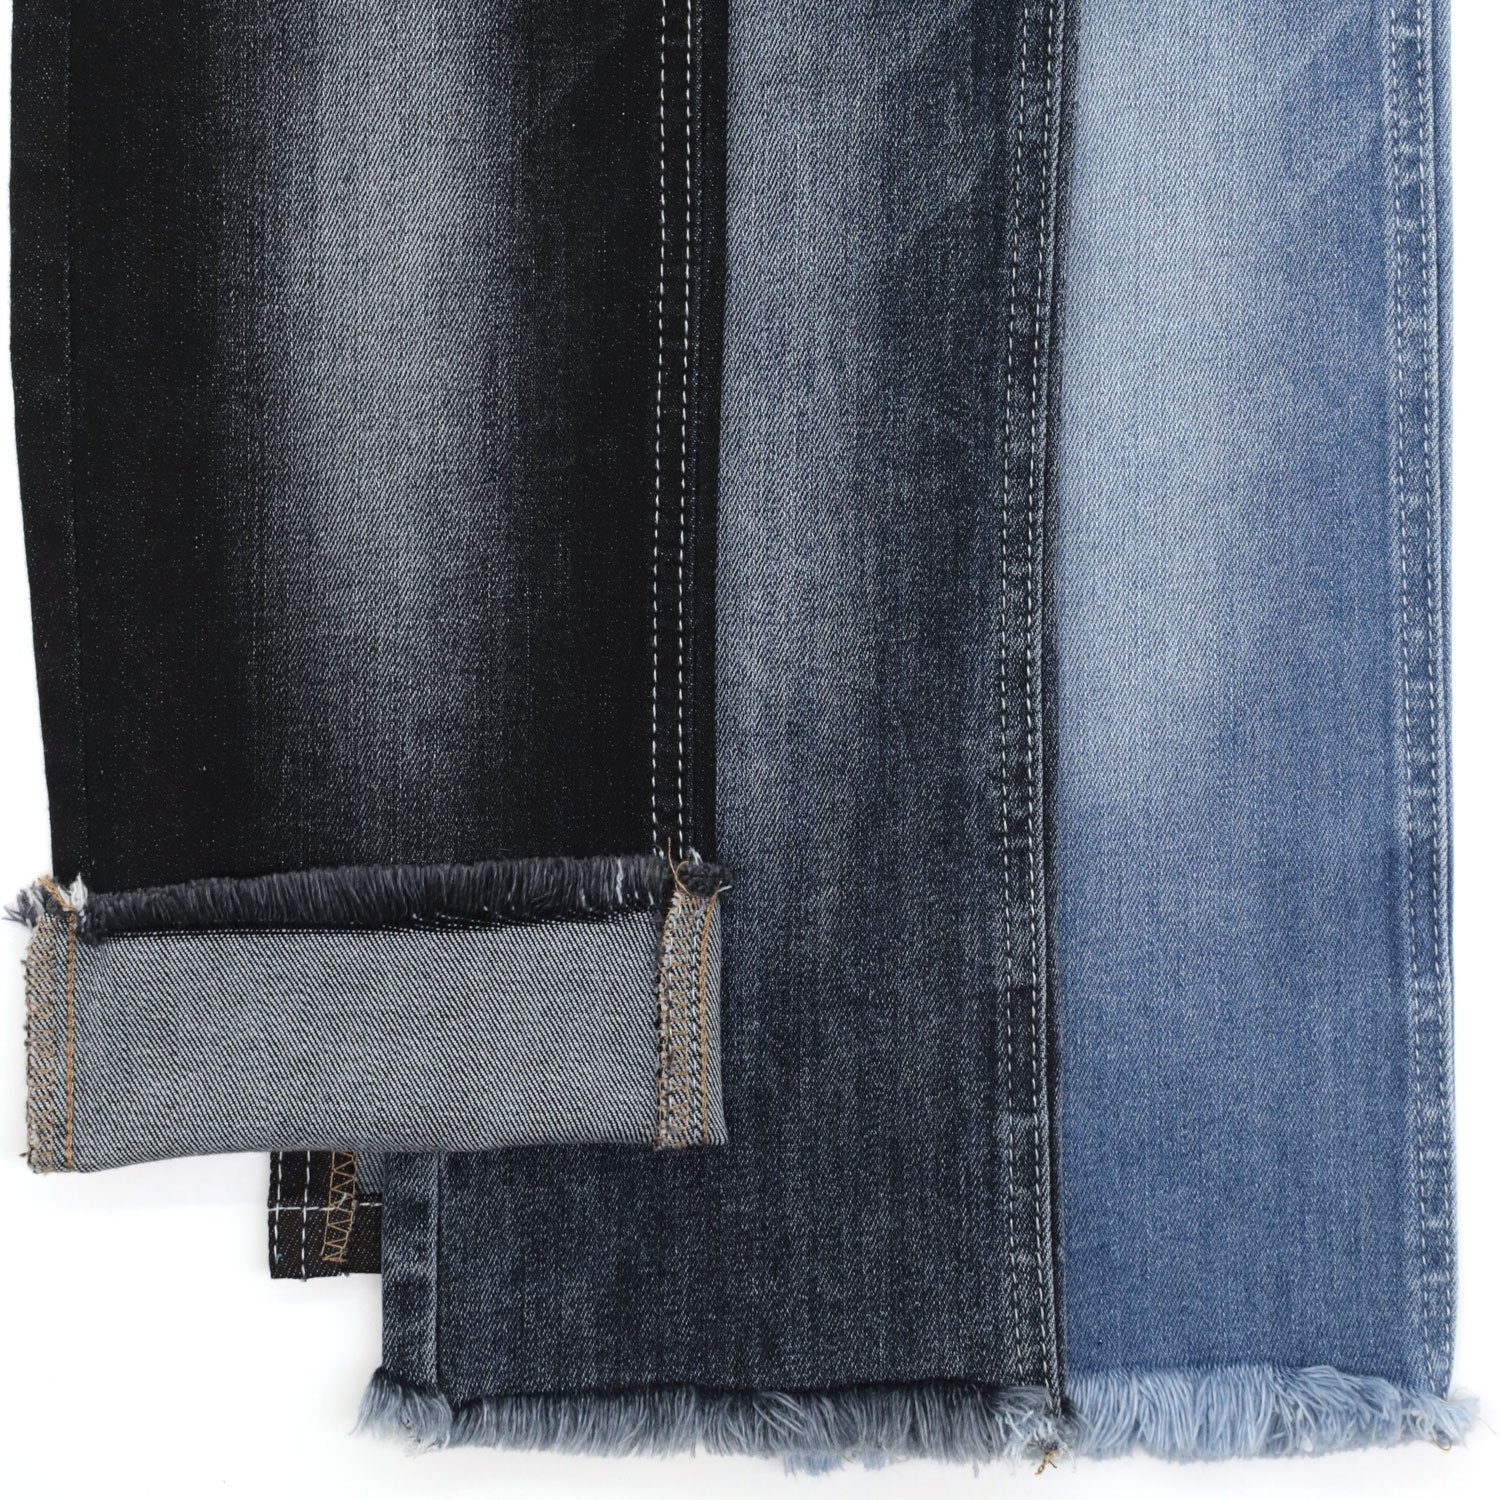 How to Buy Cheap and Stylish Denim Fabric for Jean 2